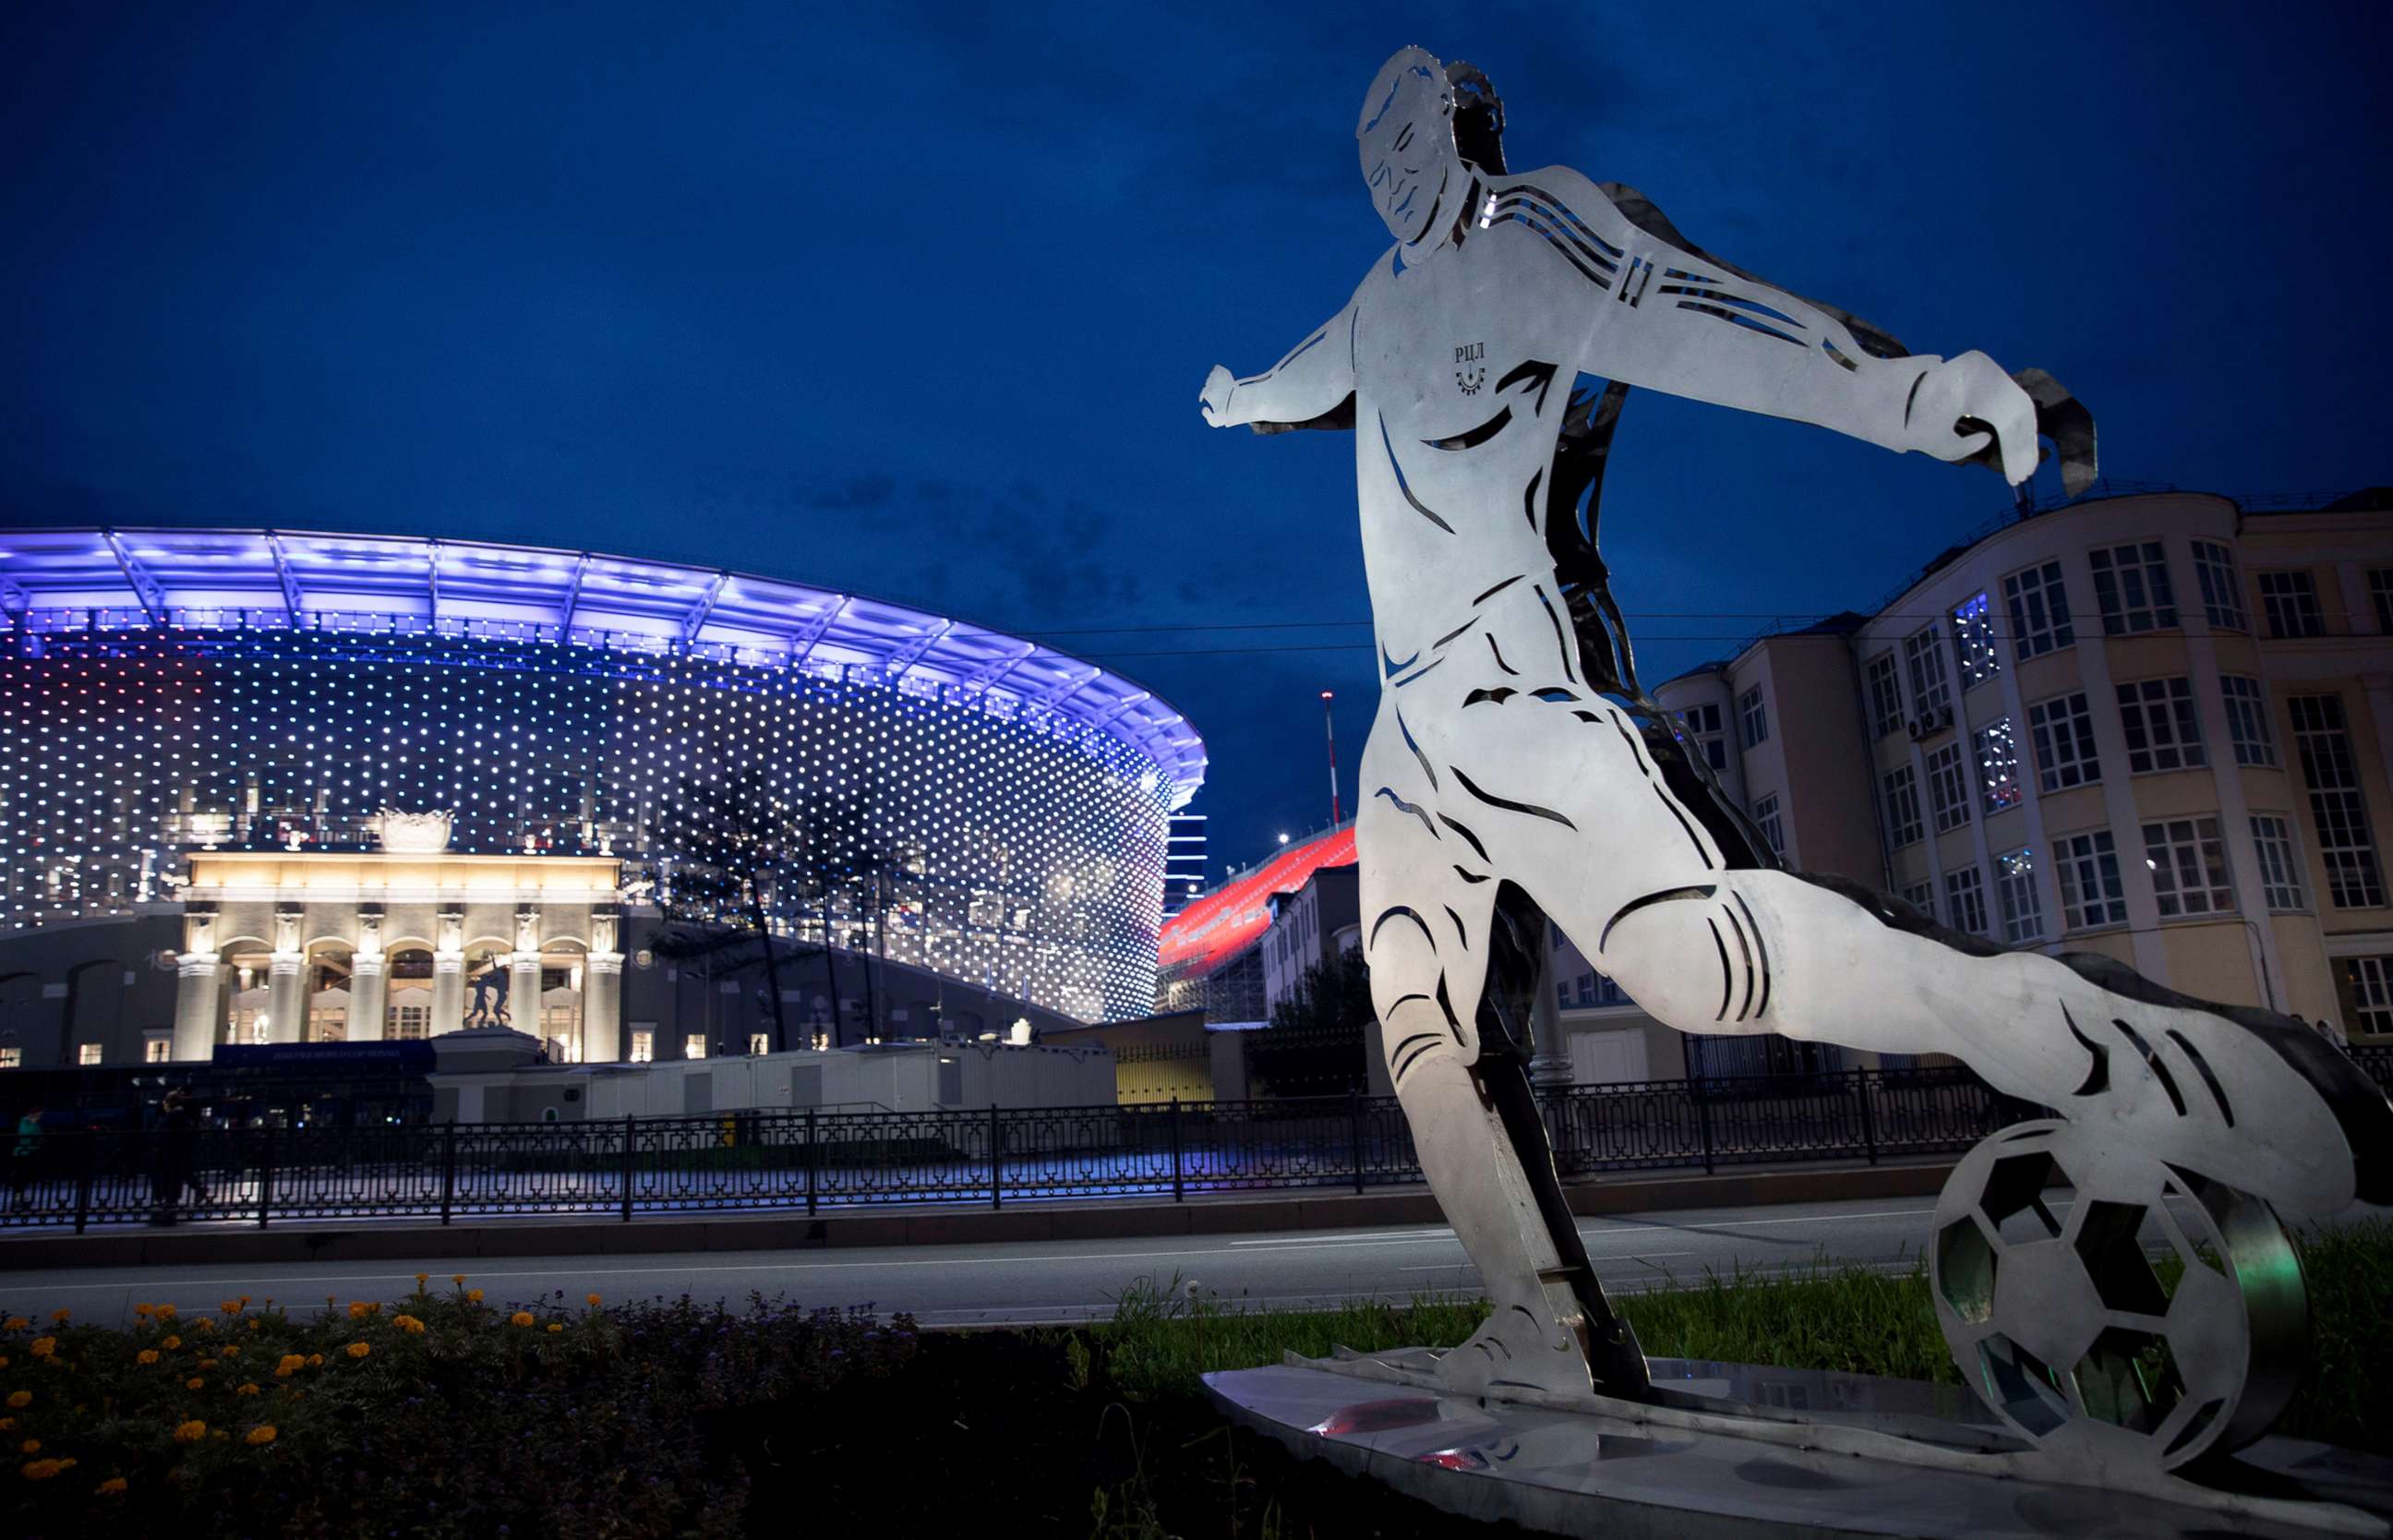 PHOTO: A statue is pictured in front of the Central Stadium in Ekaterinburg, Russia, on June 13, 2018.